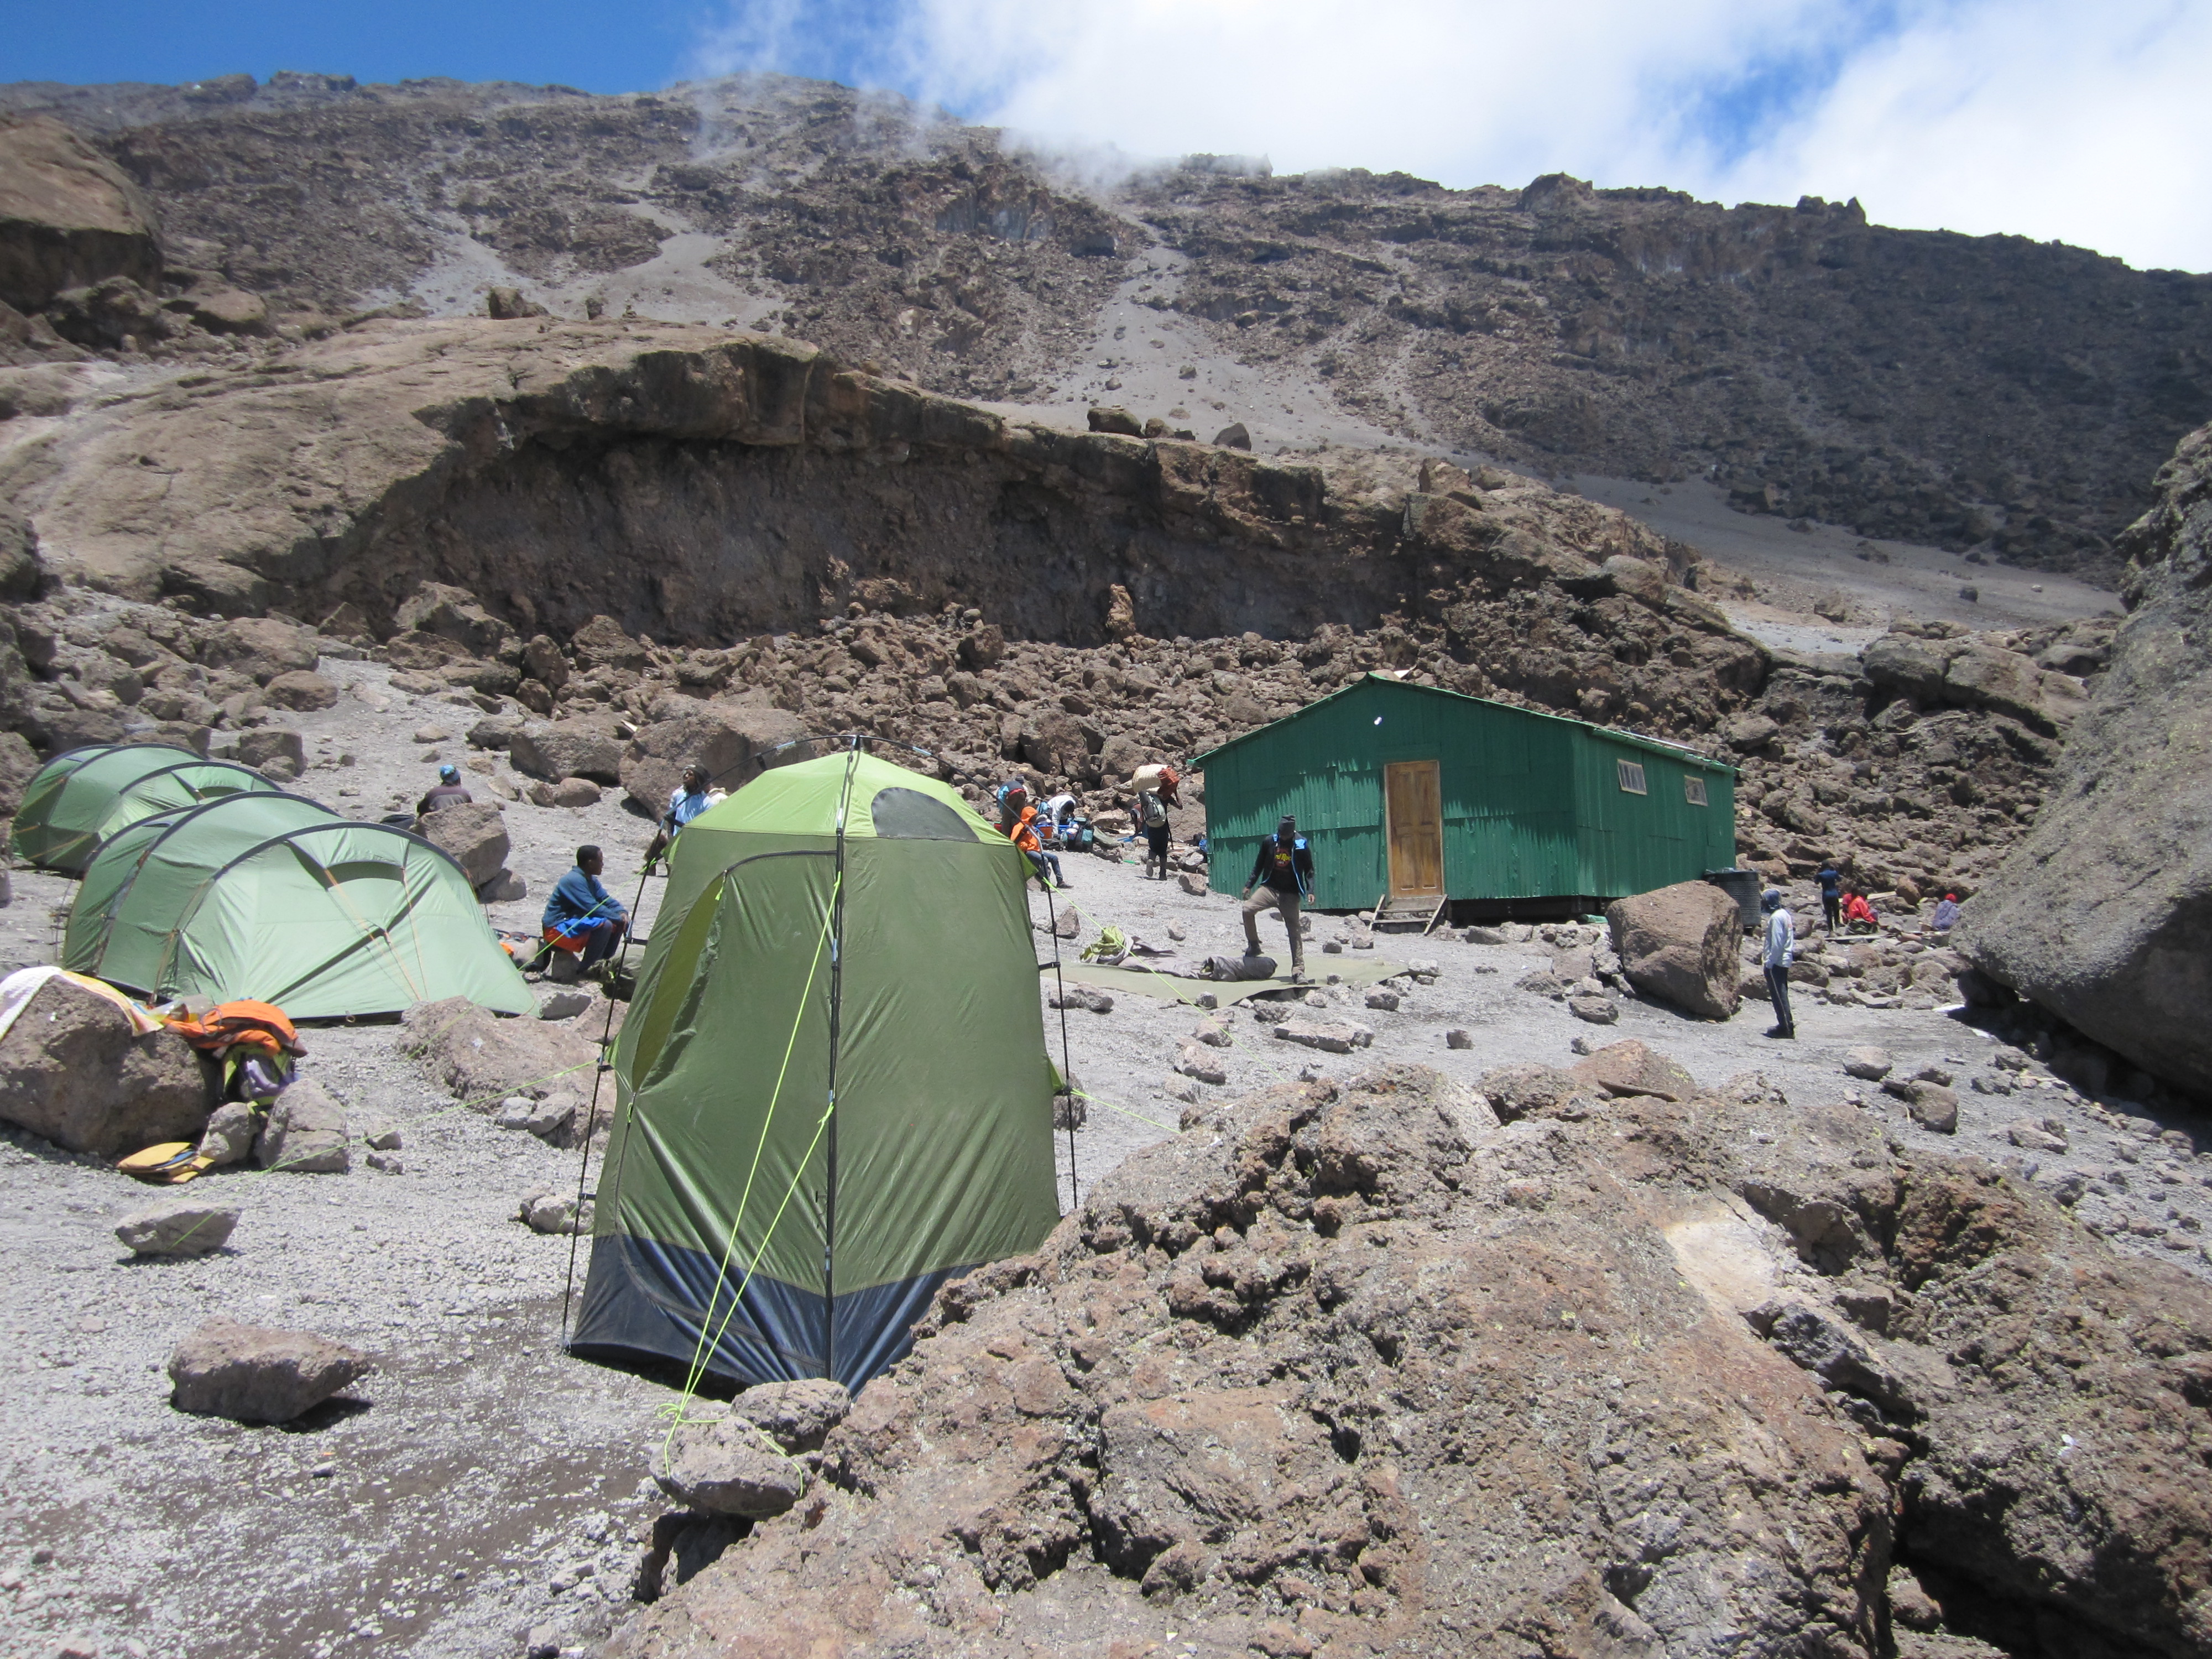 View of camp at School Hut